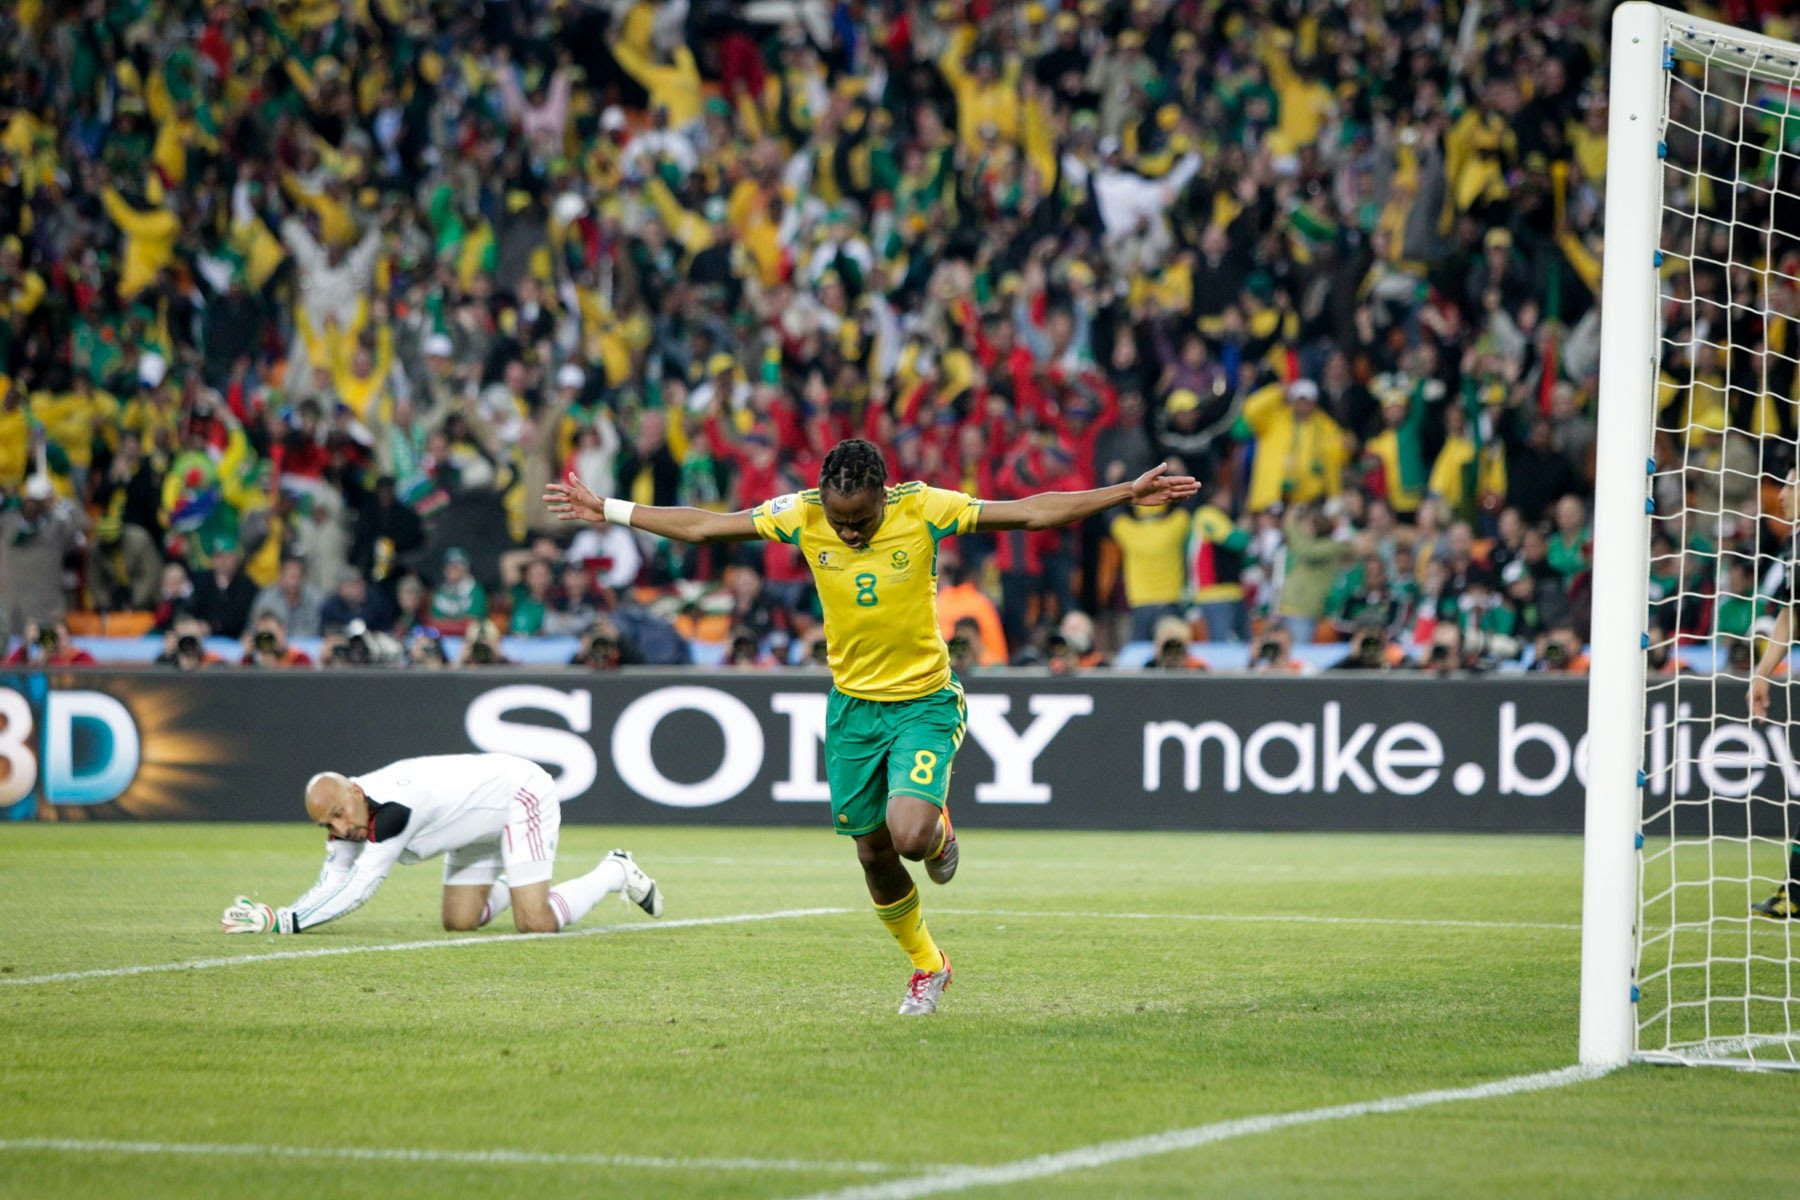 Siphiwe Tshabalala scores the opening goal of the 2010 FIFA World Cup in South Africa for South Africa